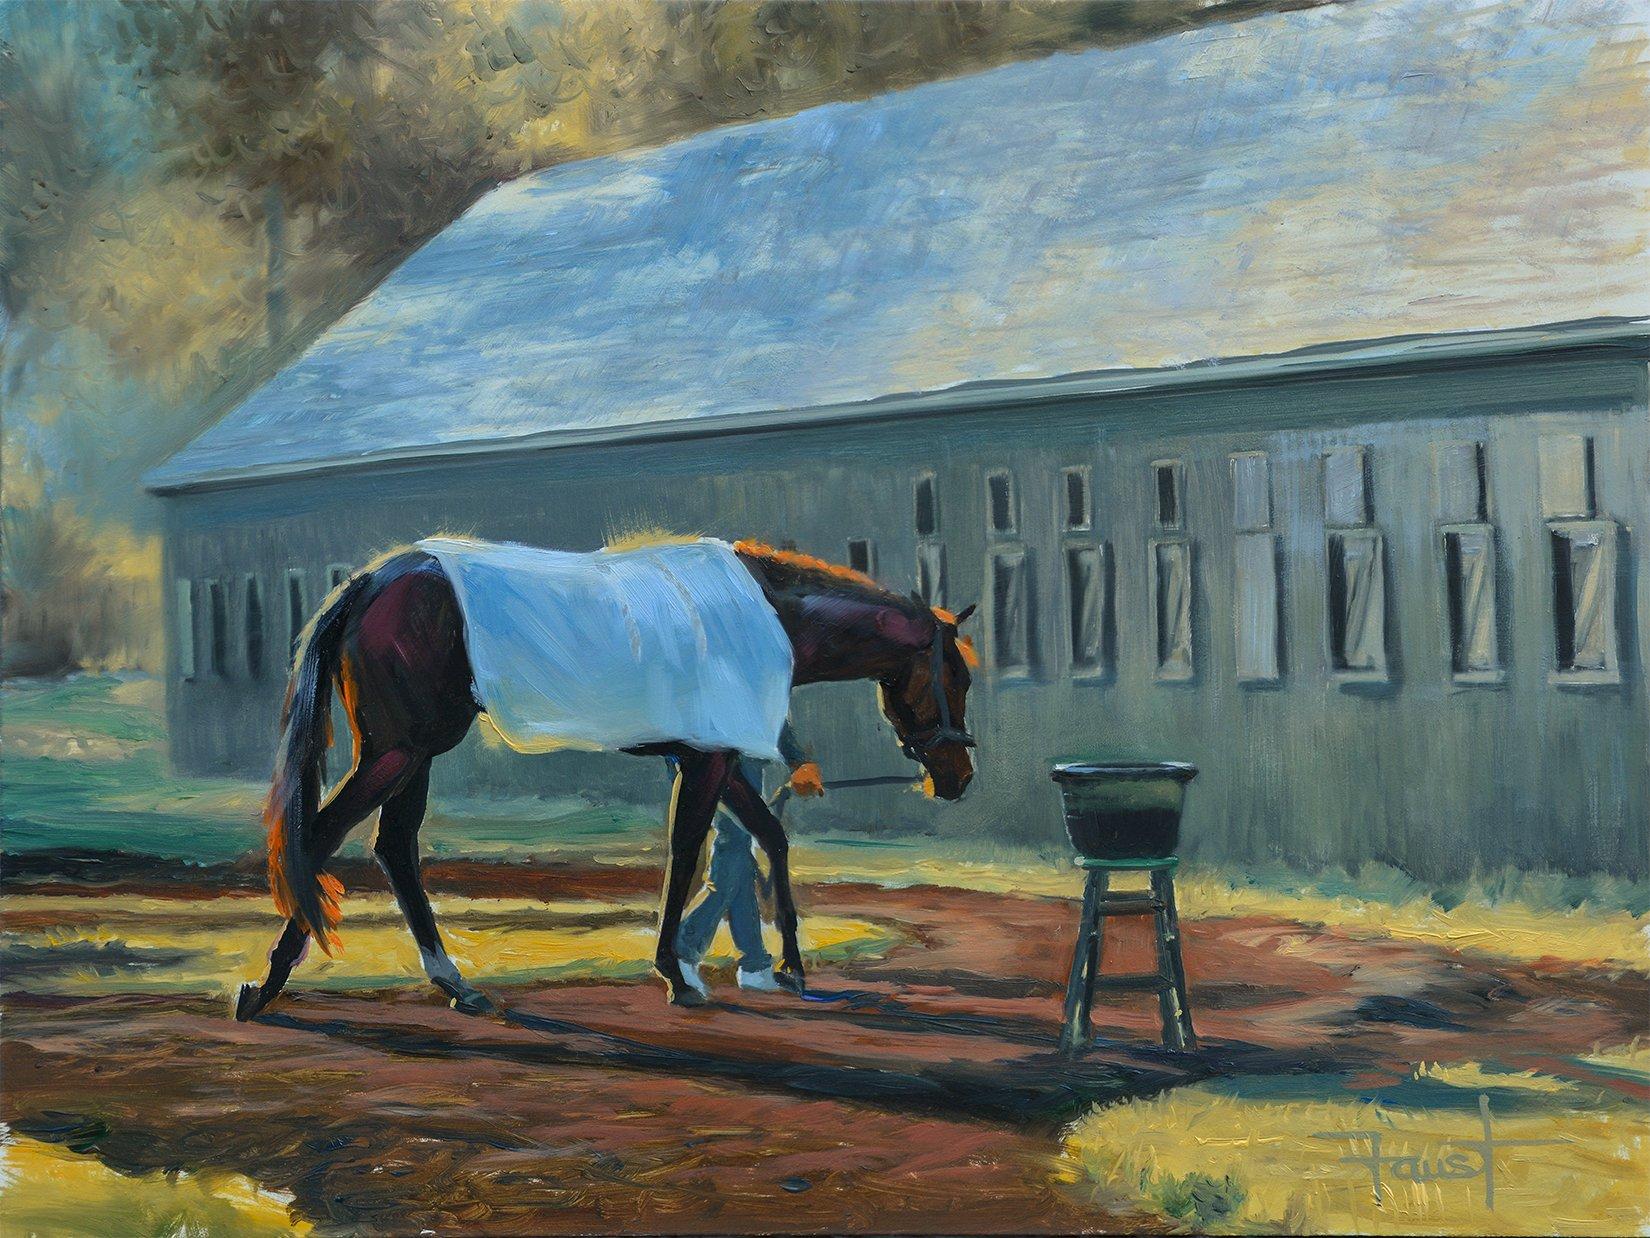 Shawn Faust, "Water Stool" 12x16 Backstretch Equine Stable Oil Painting 